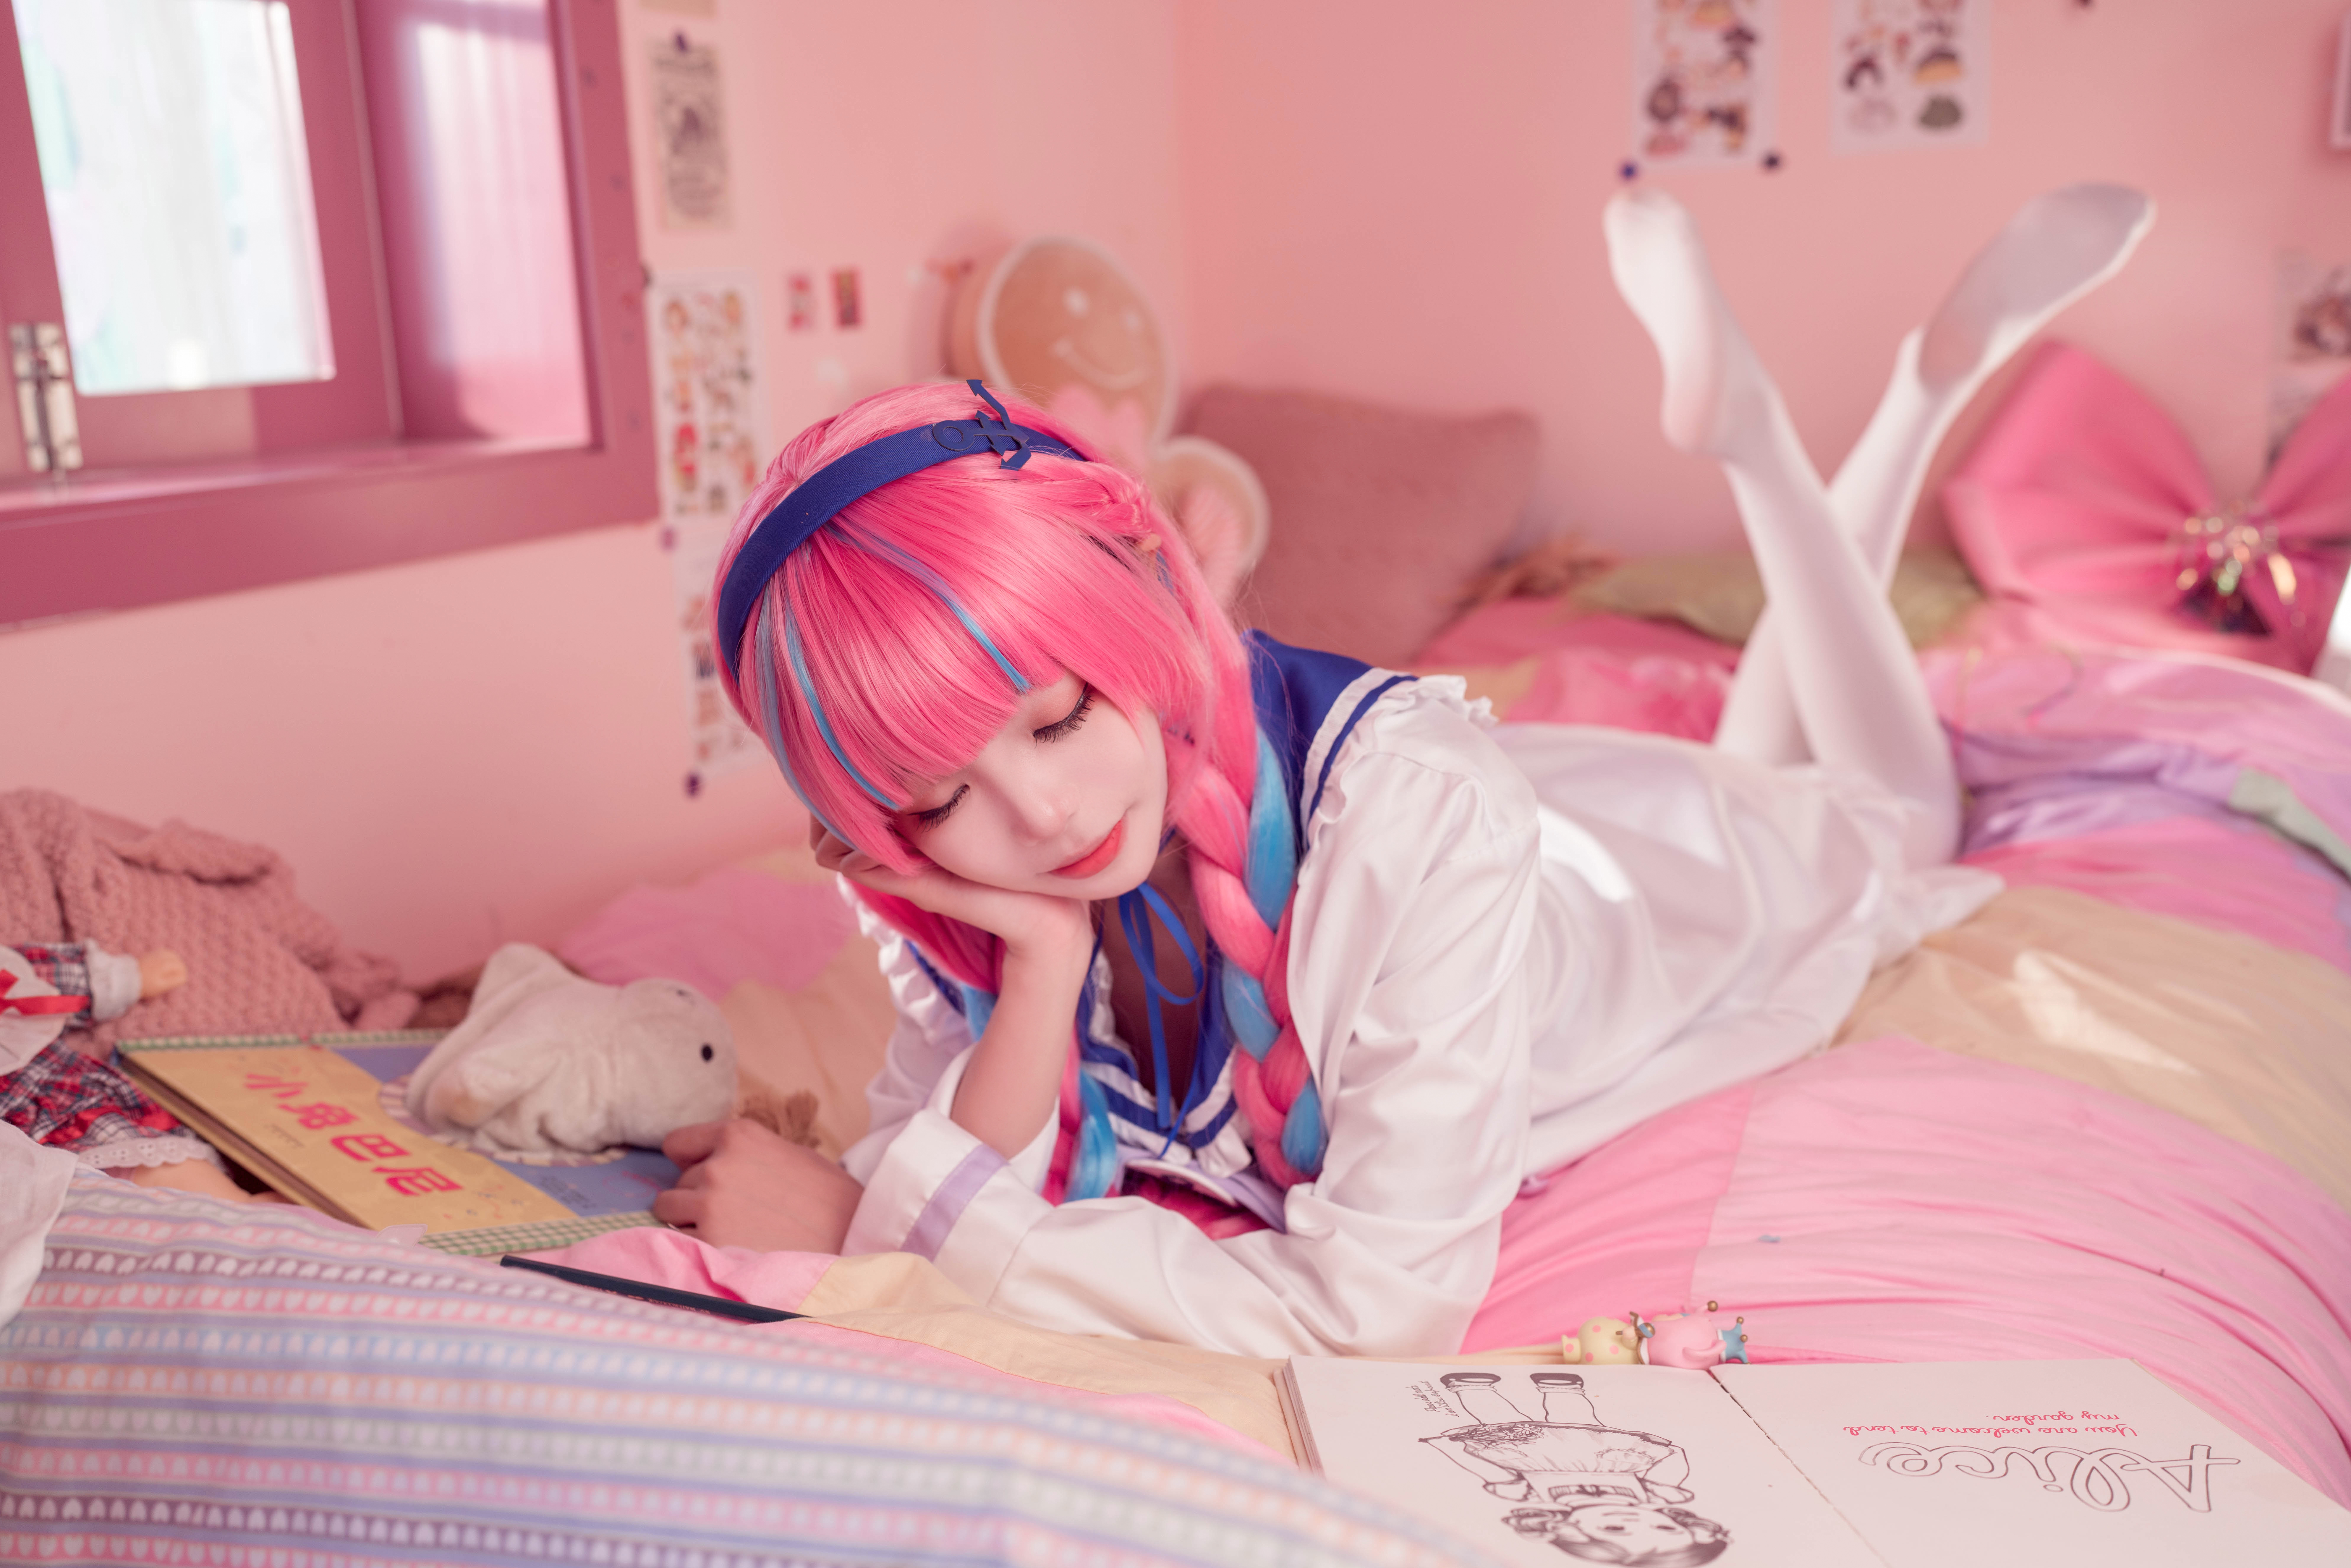 Minato Aqua Pink Hair Asian Cosplay Legs Maid Outfit Closed Eyes Feet In Bed Indoors Pale 7952x5304